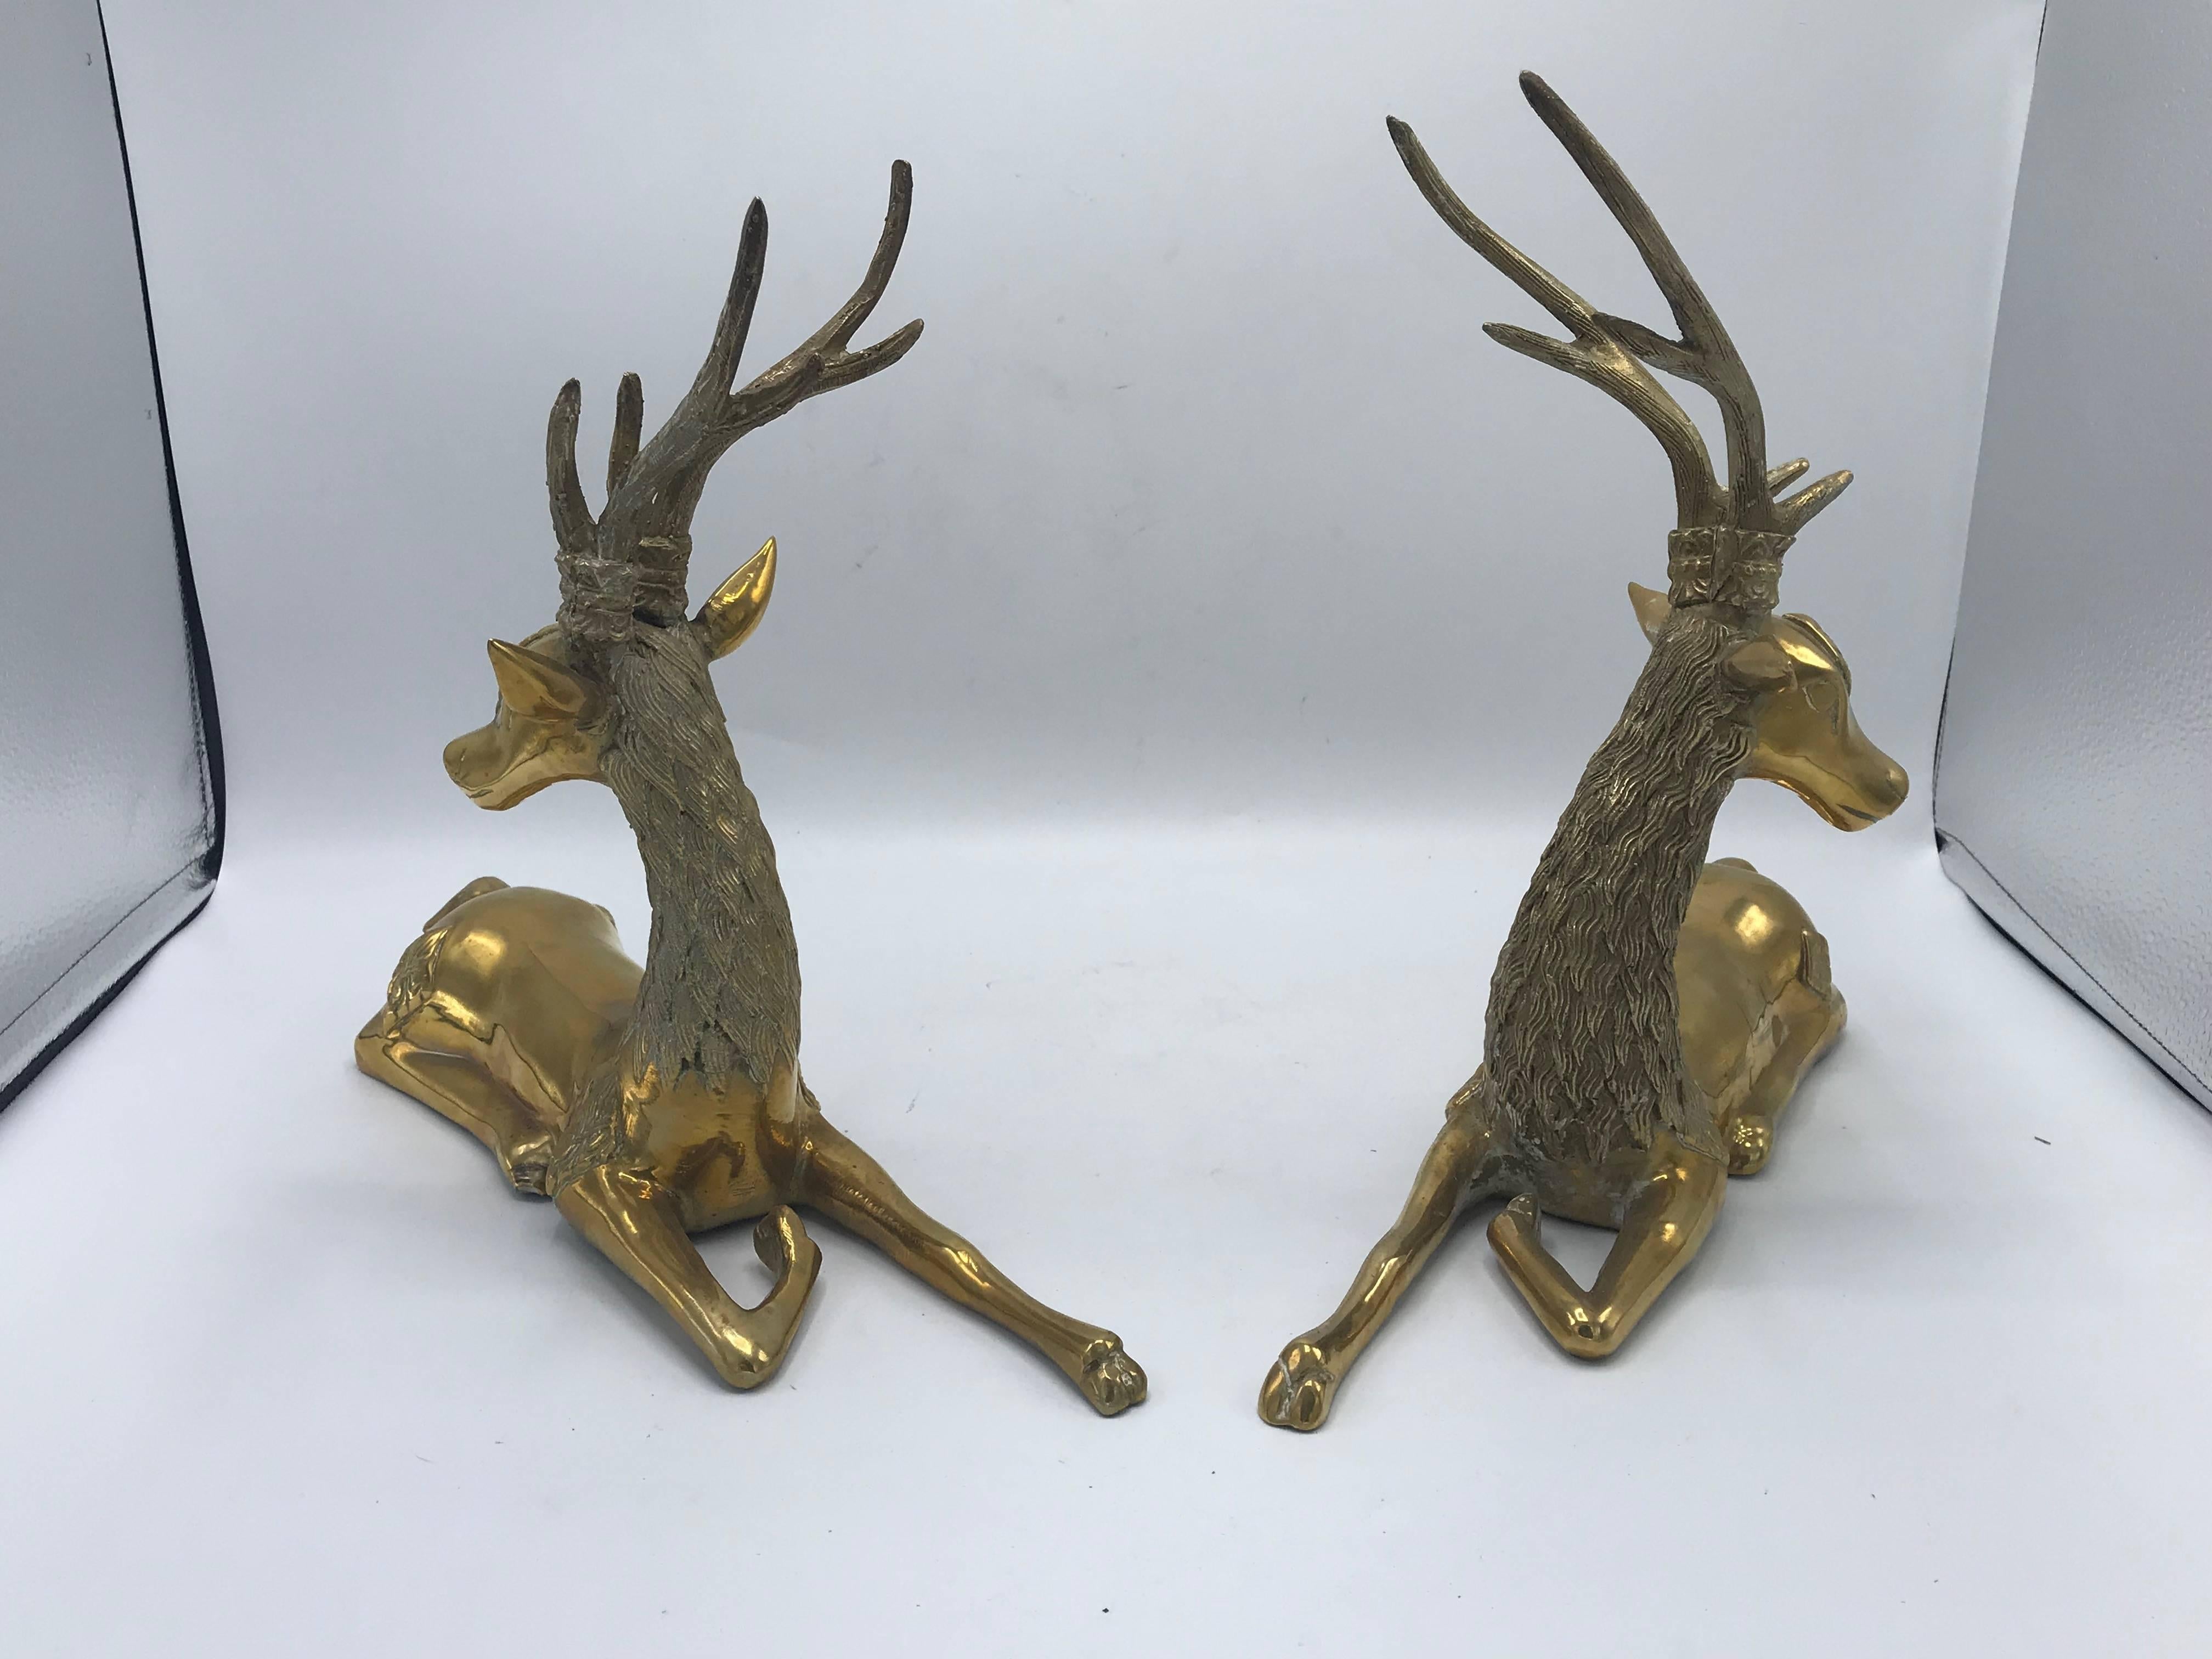 Offered is a fabulous, pair of 1970s Sarreid Ltd. brass deer sculptures. Heavy. Perfect as holiday decor! 